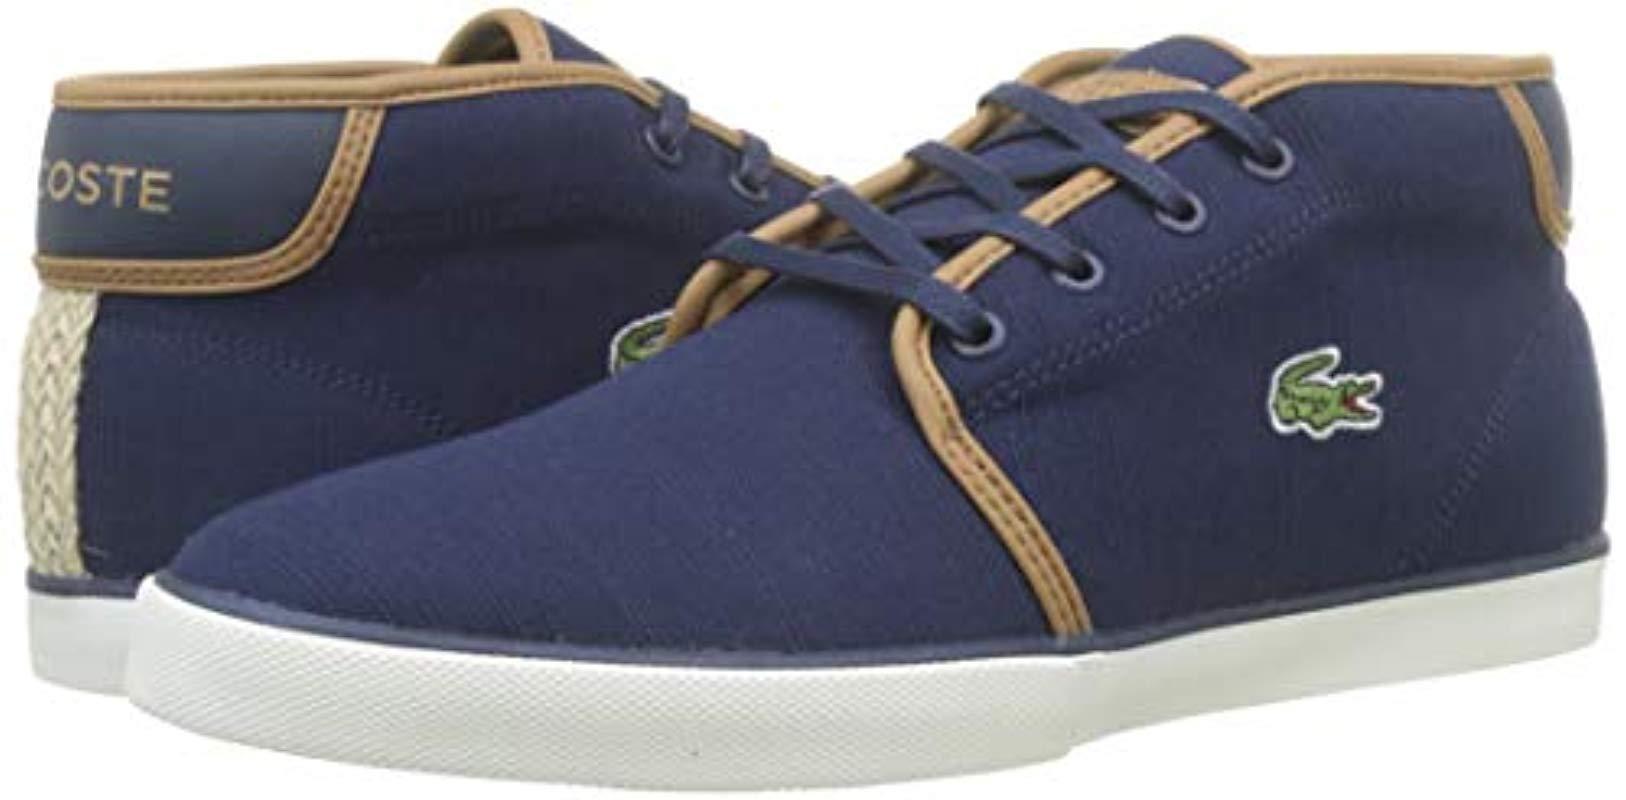 Lacoste Ampthill 119 3 Cma Hi-top Trainers in Blue for Men - Lyst